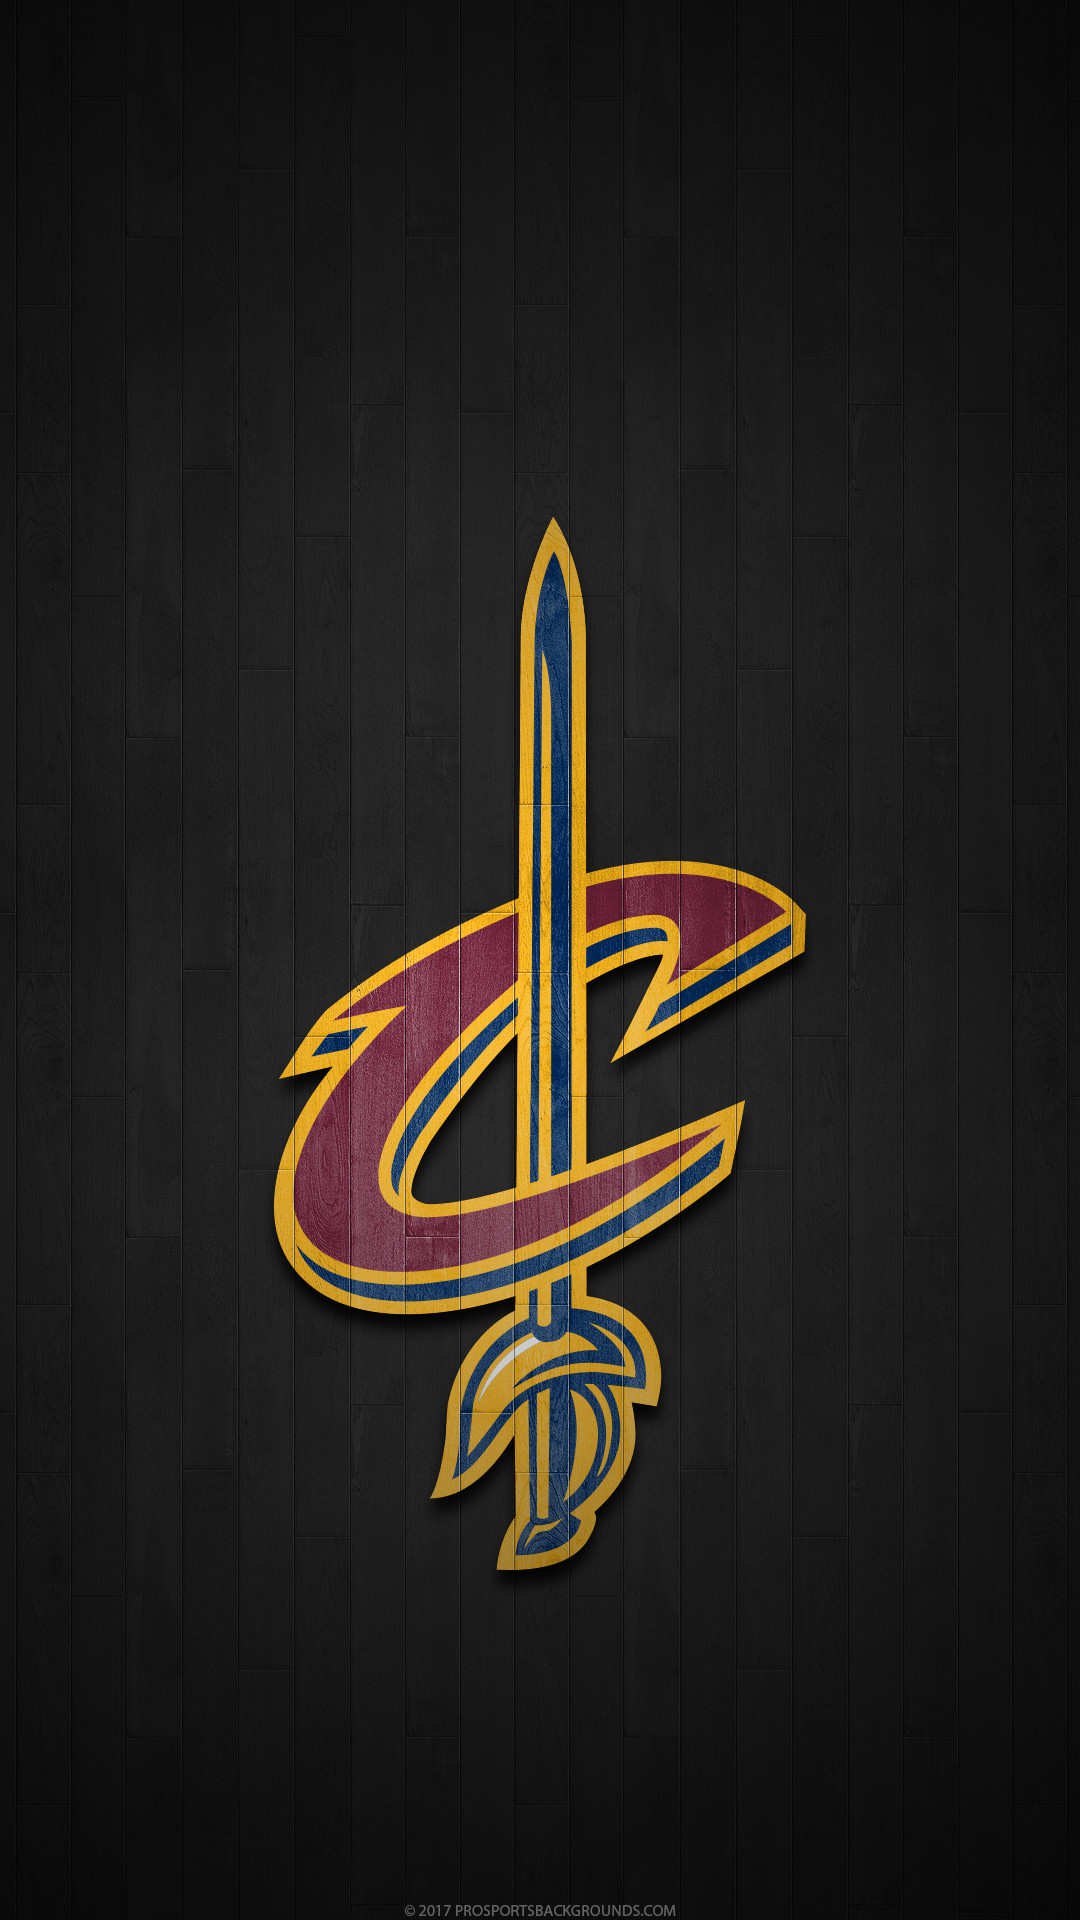 Cleveland Cavaliers Wallpapers HD Wallpapers Download Free Map Images Wallpaper [wallpaper684.blogspot.com]